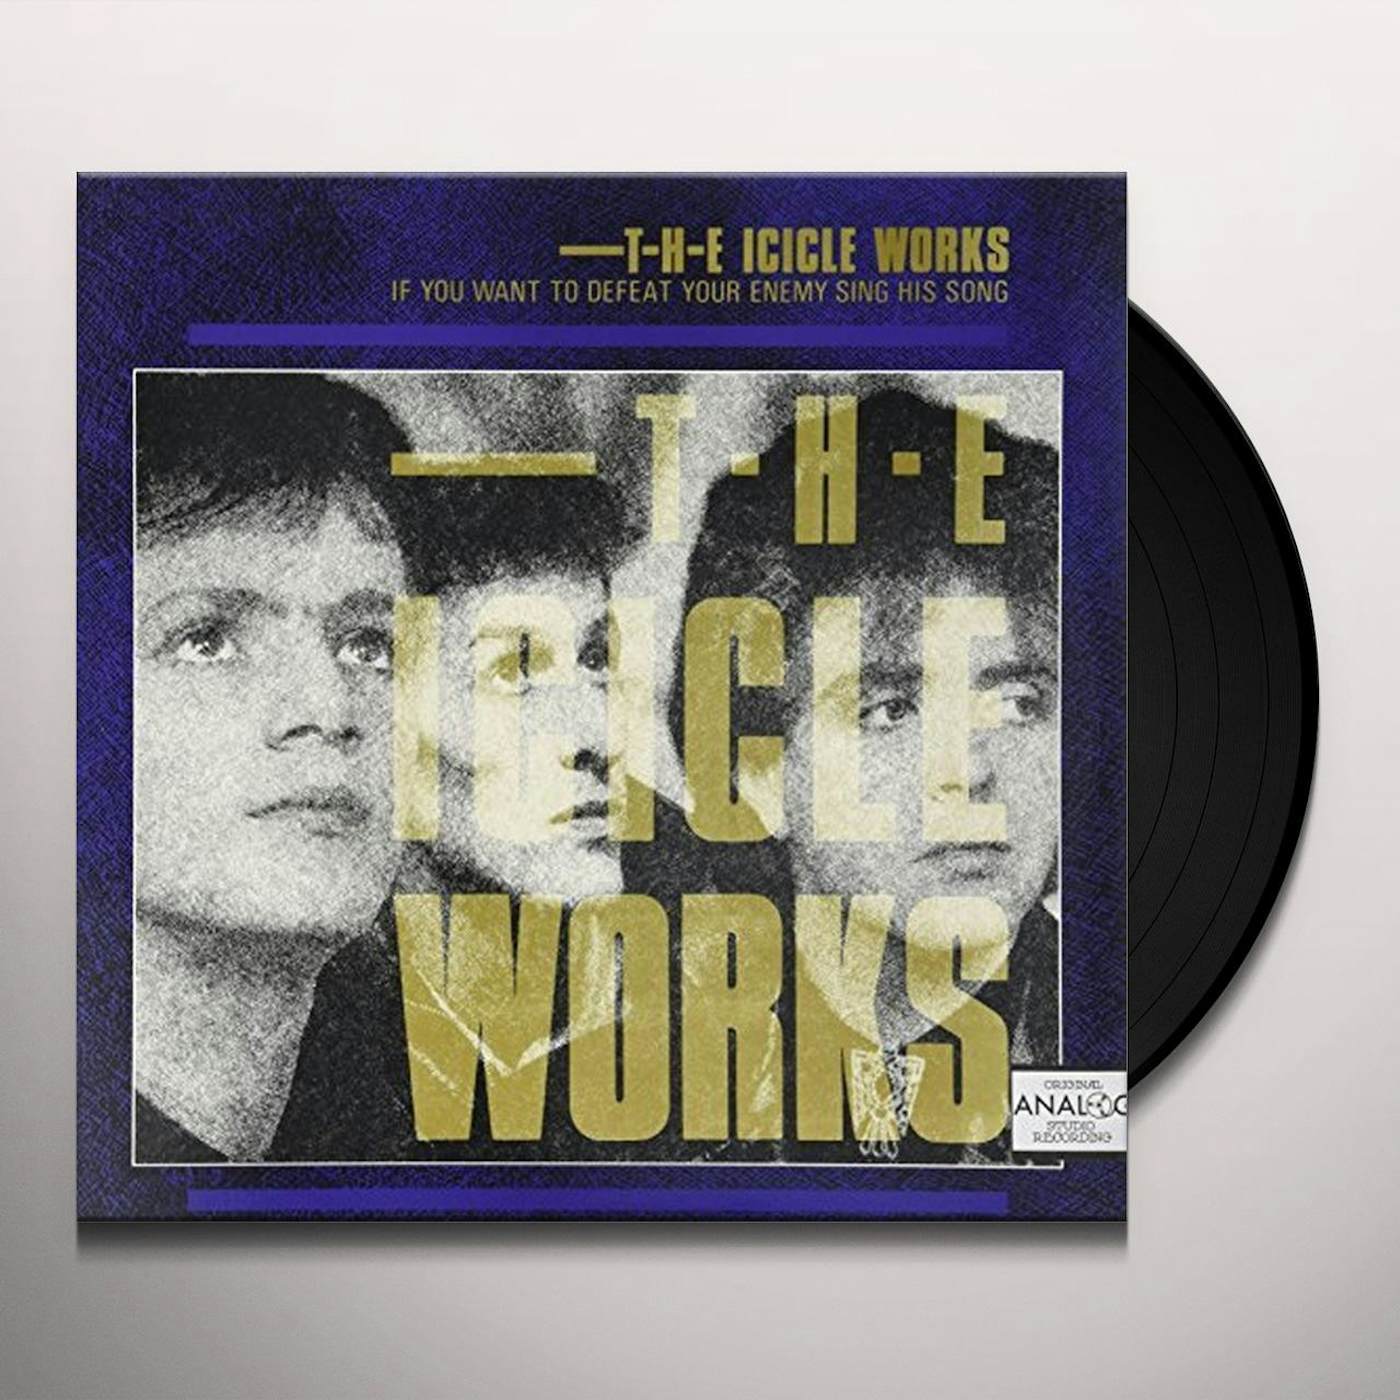 The Icicle Works IF YOU WANT TO DEFEAT YOUR ENEMY Vinyl Record